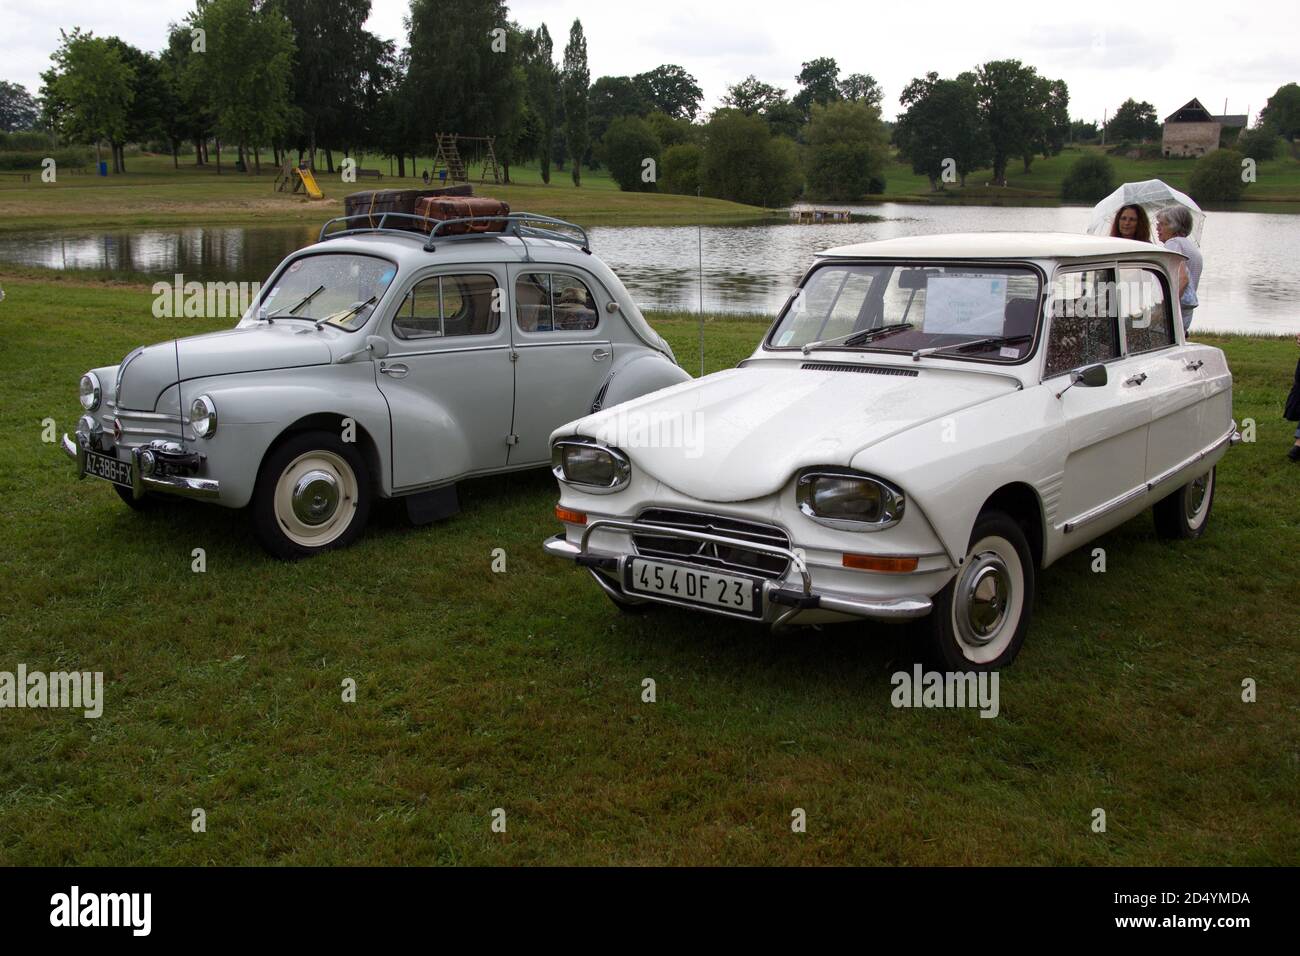 Citroen Ami 6 (white) and Renault 4CV (grey) vintage French cars in     France Stock Photo